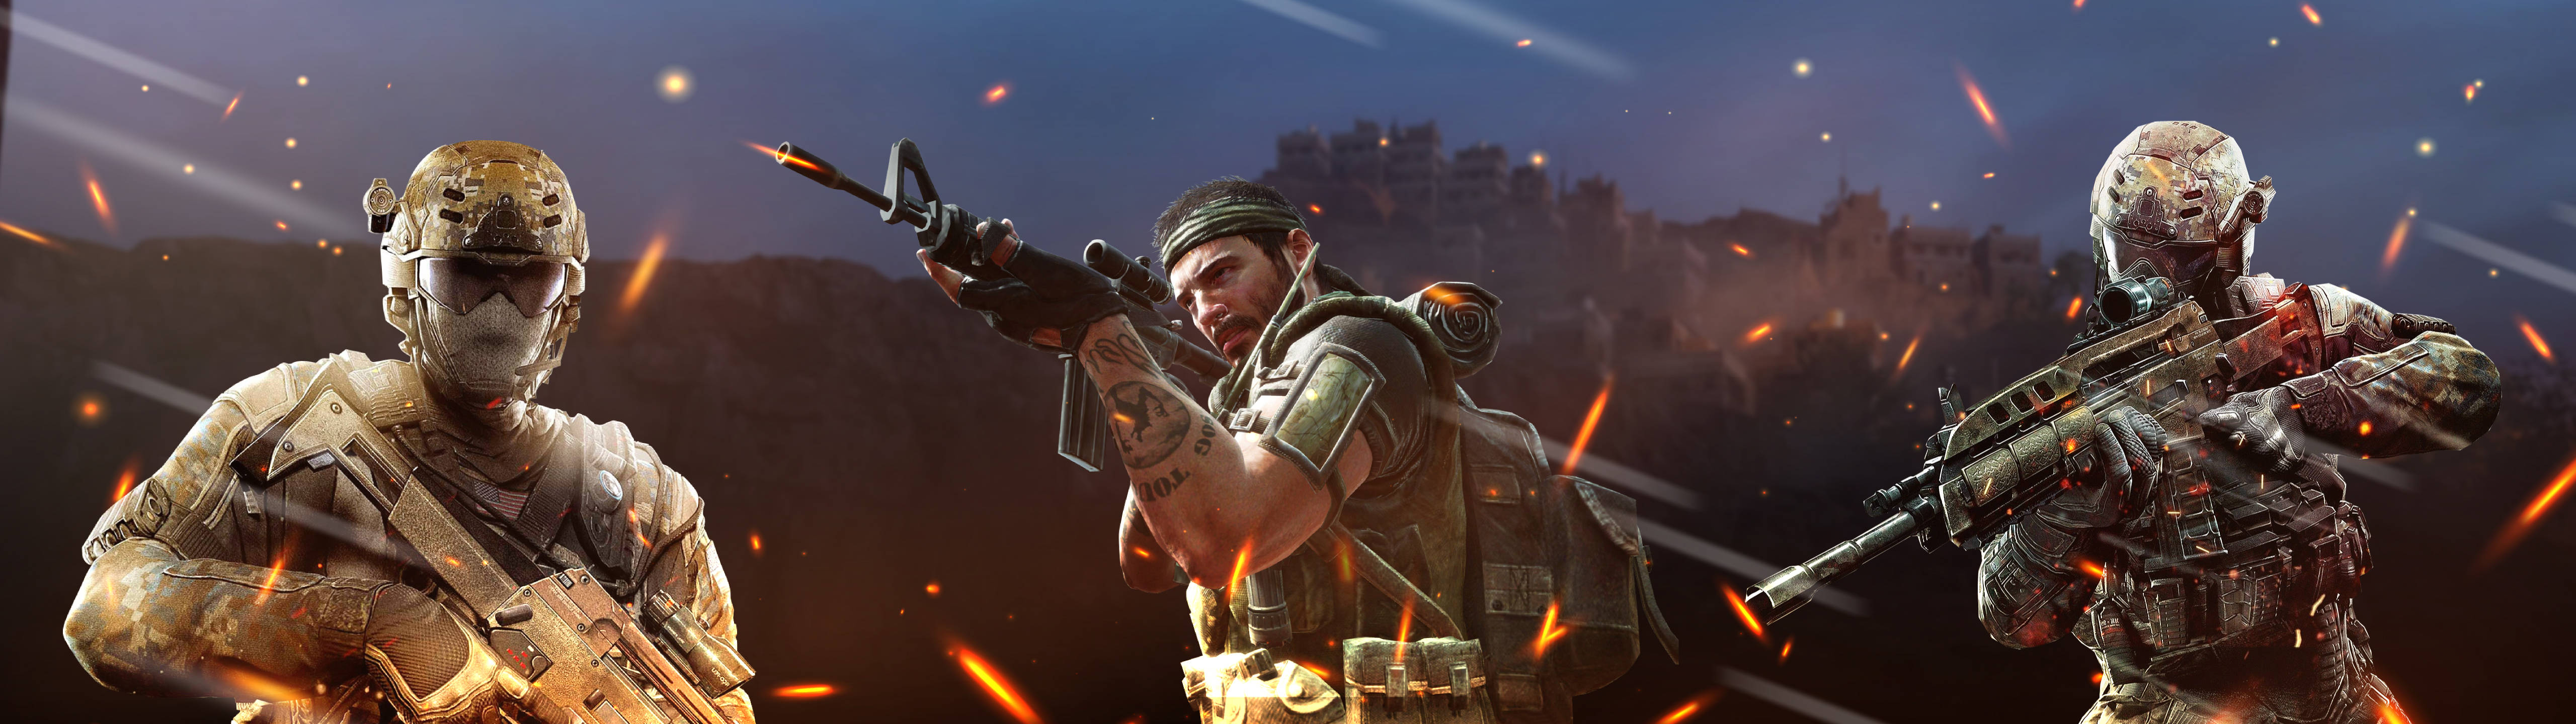 Sniper Elite Characters 5120x1440 Gaming Background